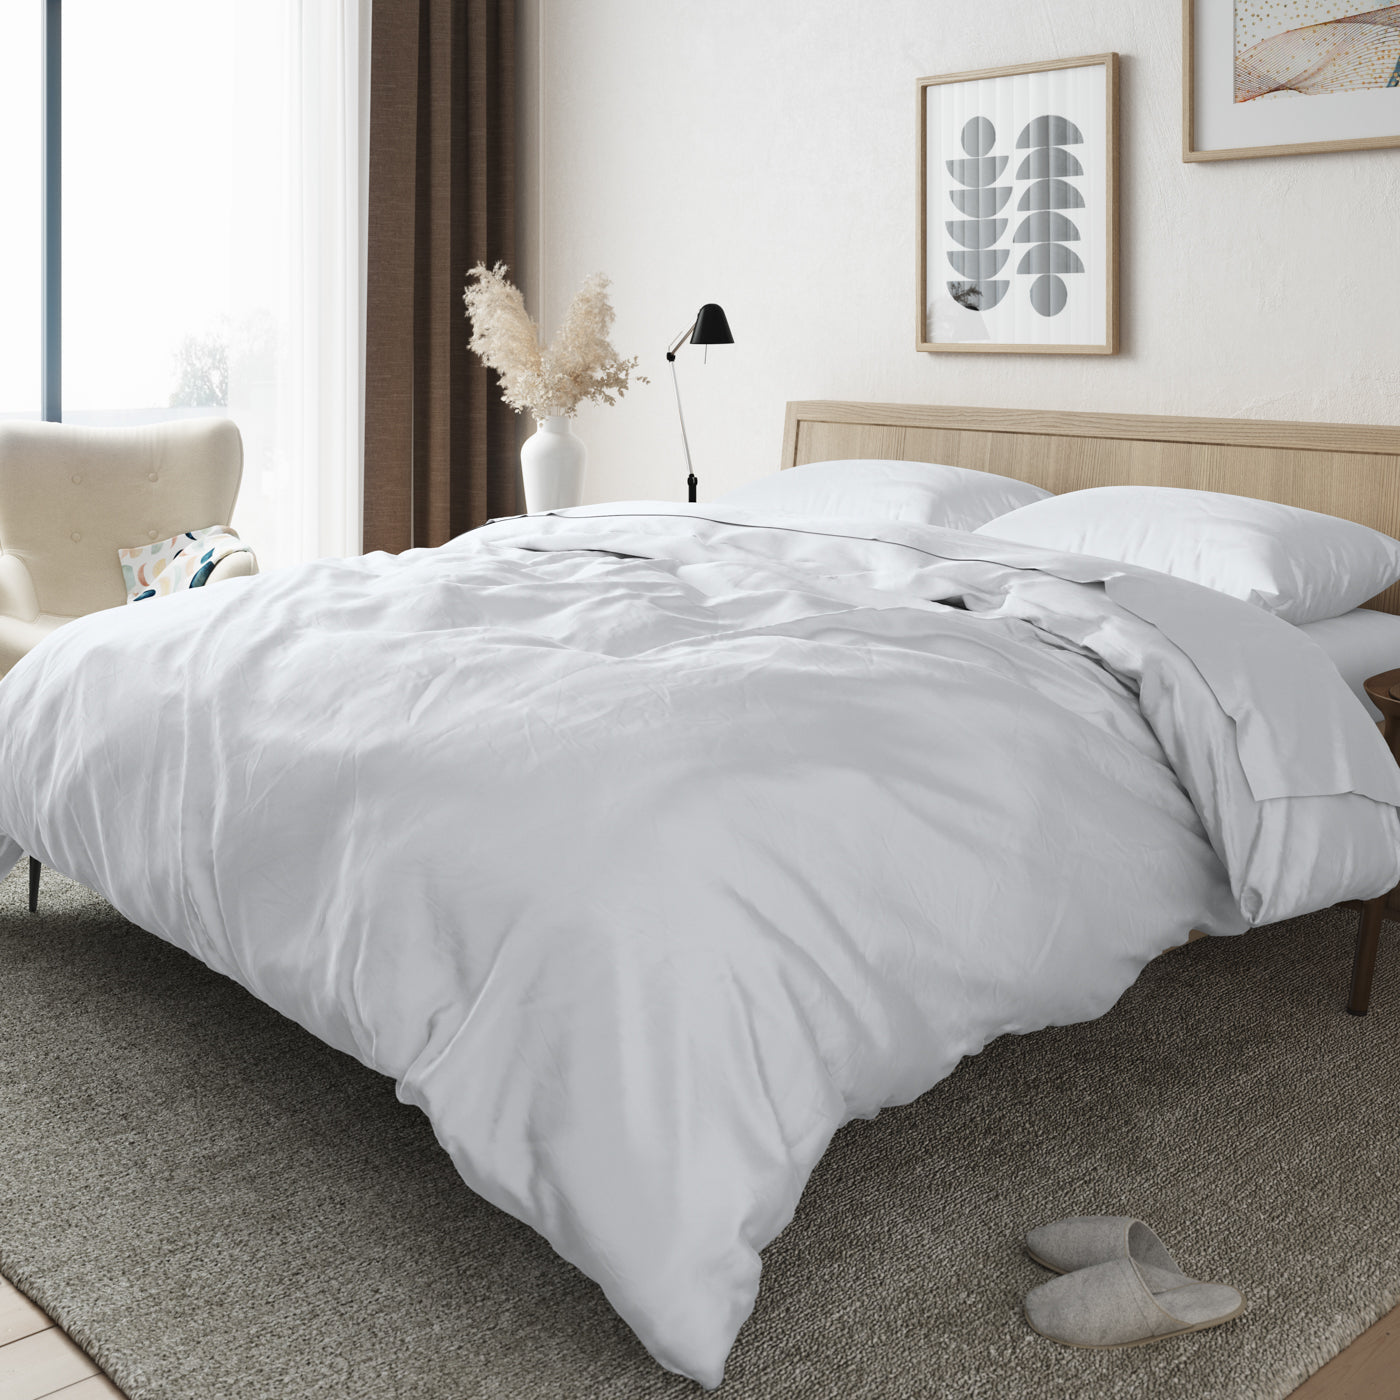 What Is a Duvet Cover?